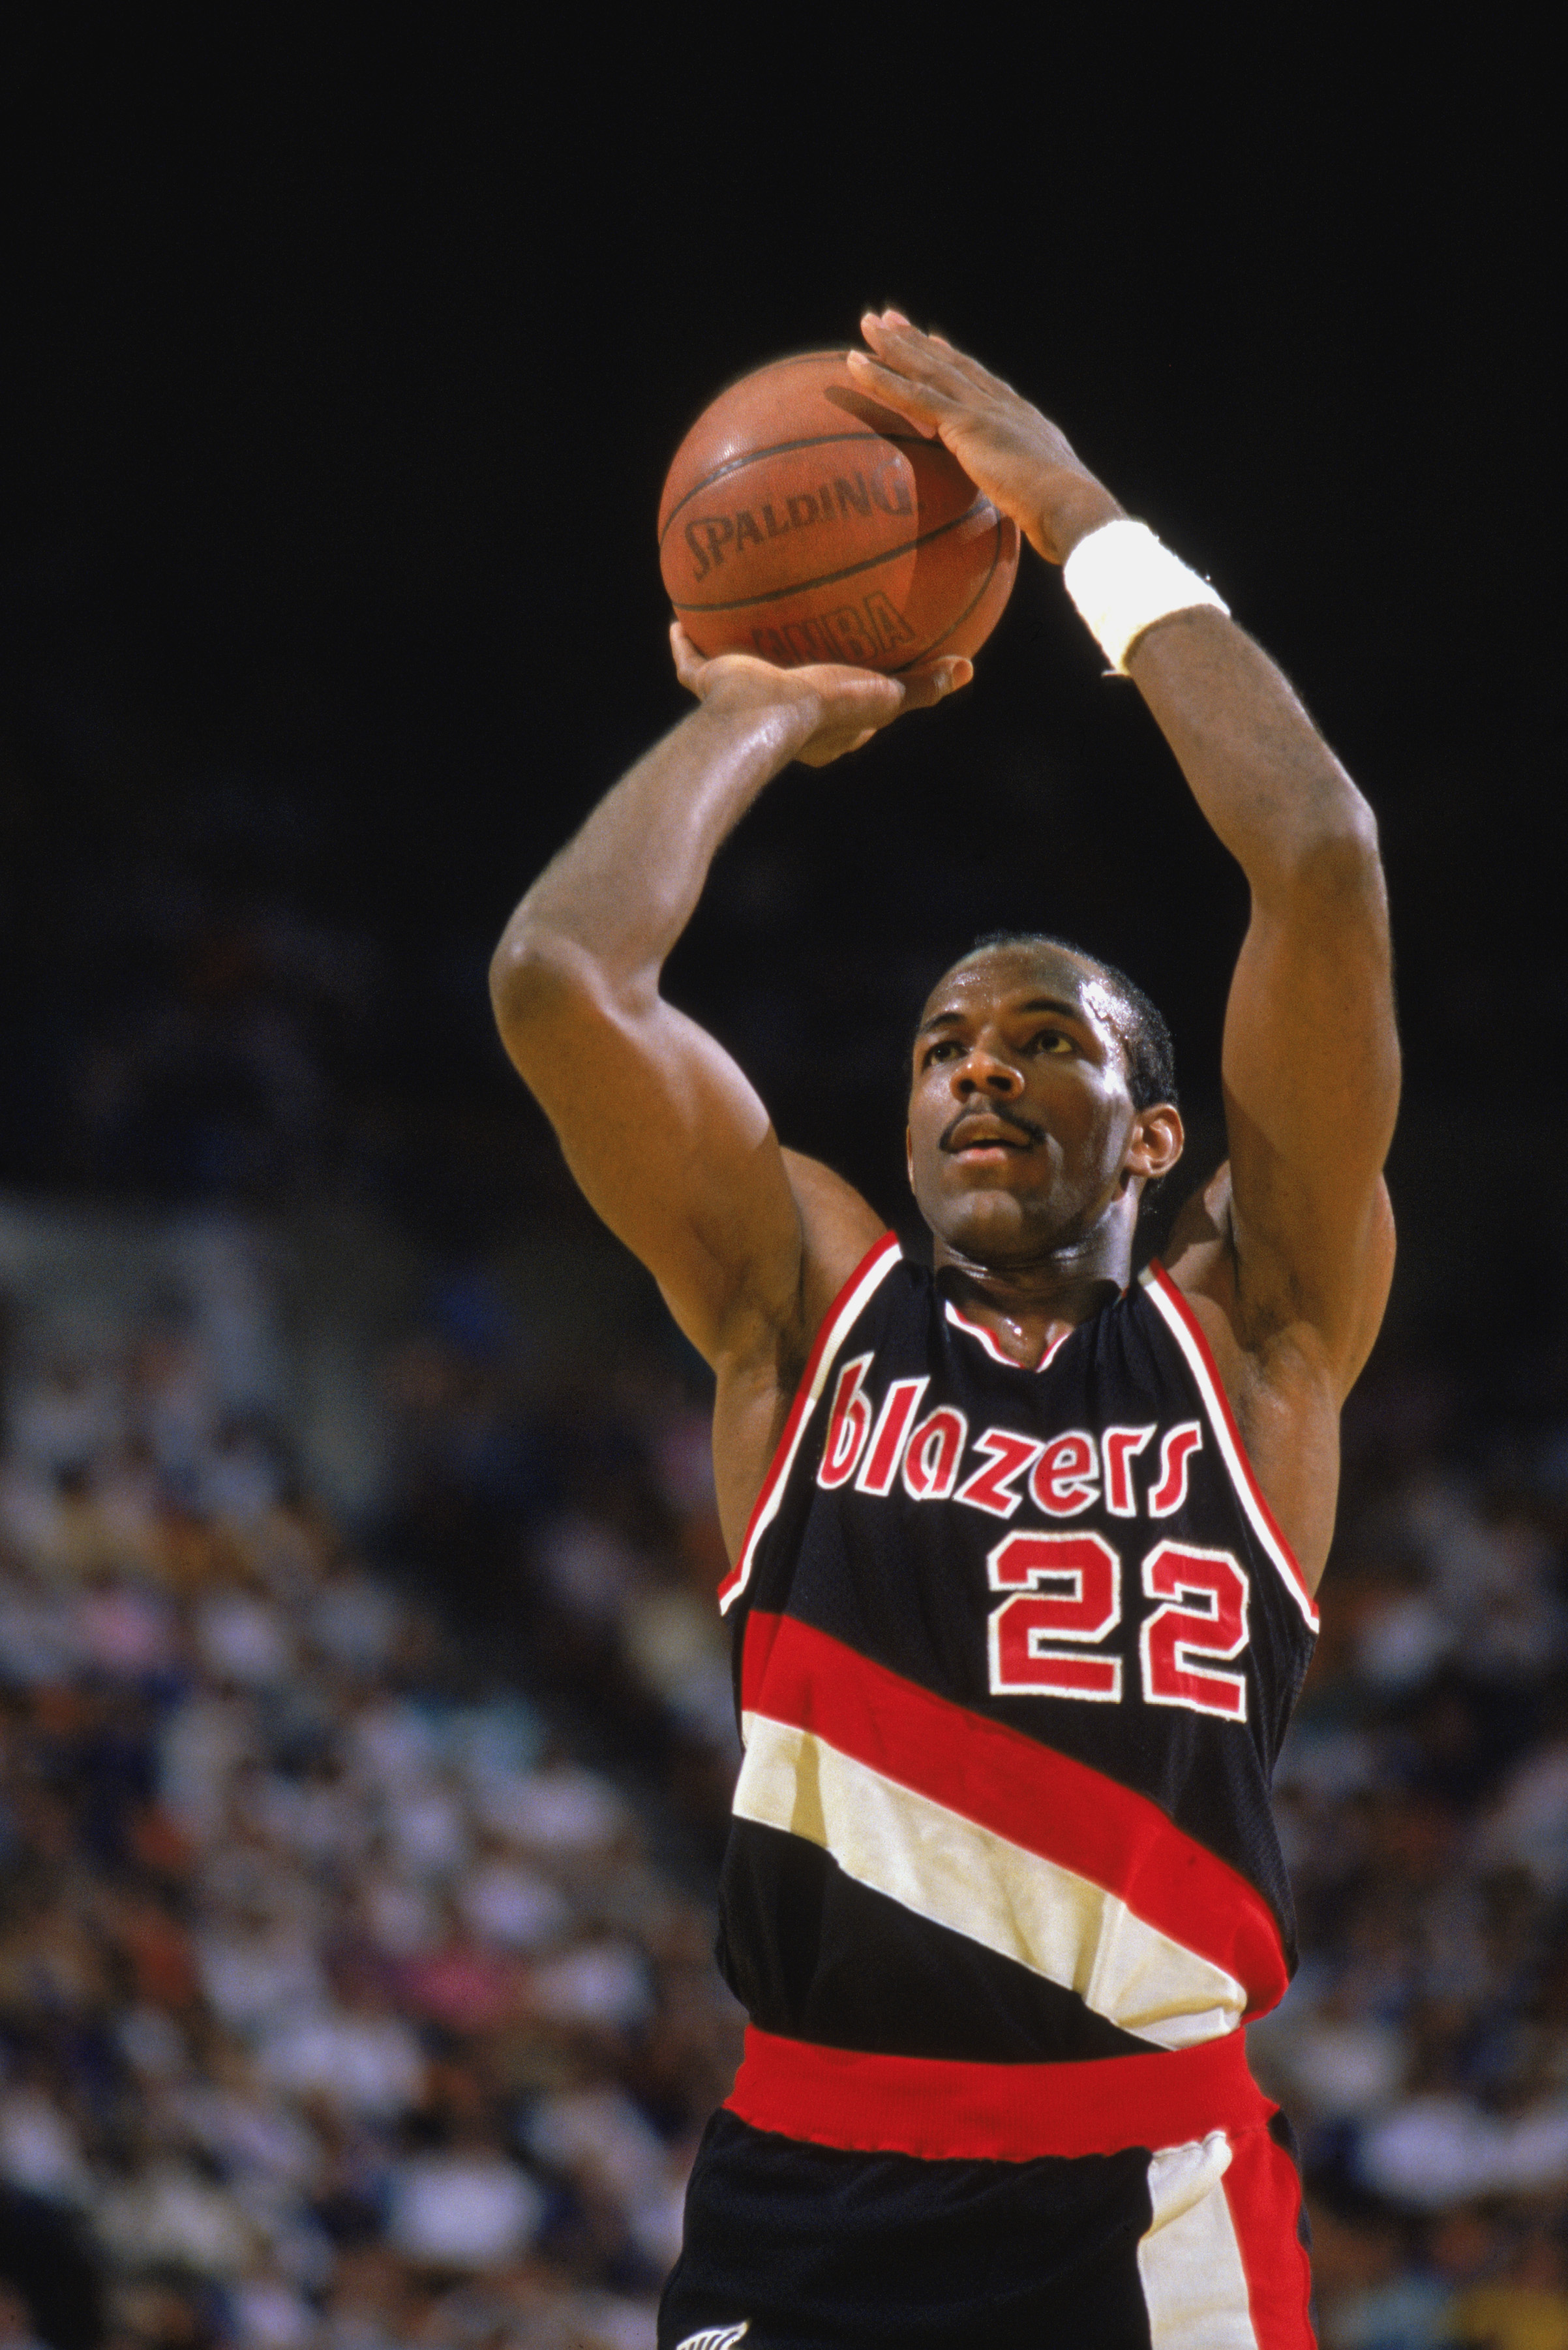 NBA 75: At No. 43, Clyde Drexler was a high-flying, athletic guard